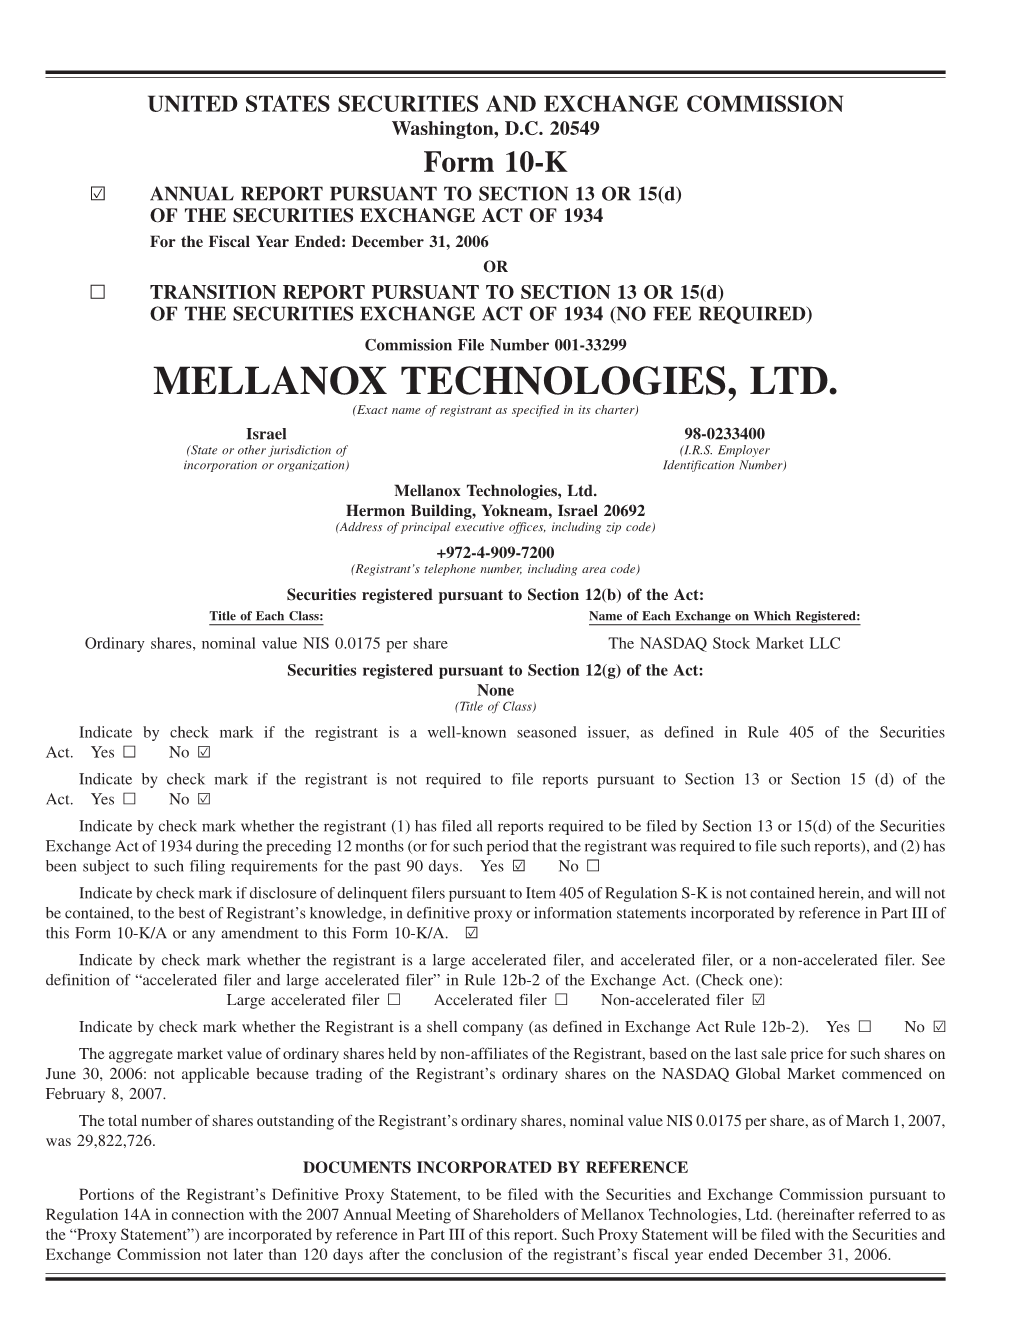 MELLANOX TECHNOLOGIES, LTD. (Exact Name of Registrant As Specified in Its Charter) Israel 98-0233400 (State Or Other Jurisdiction of (I.R.S